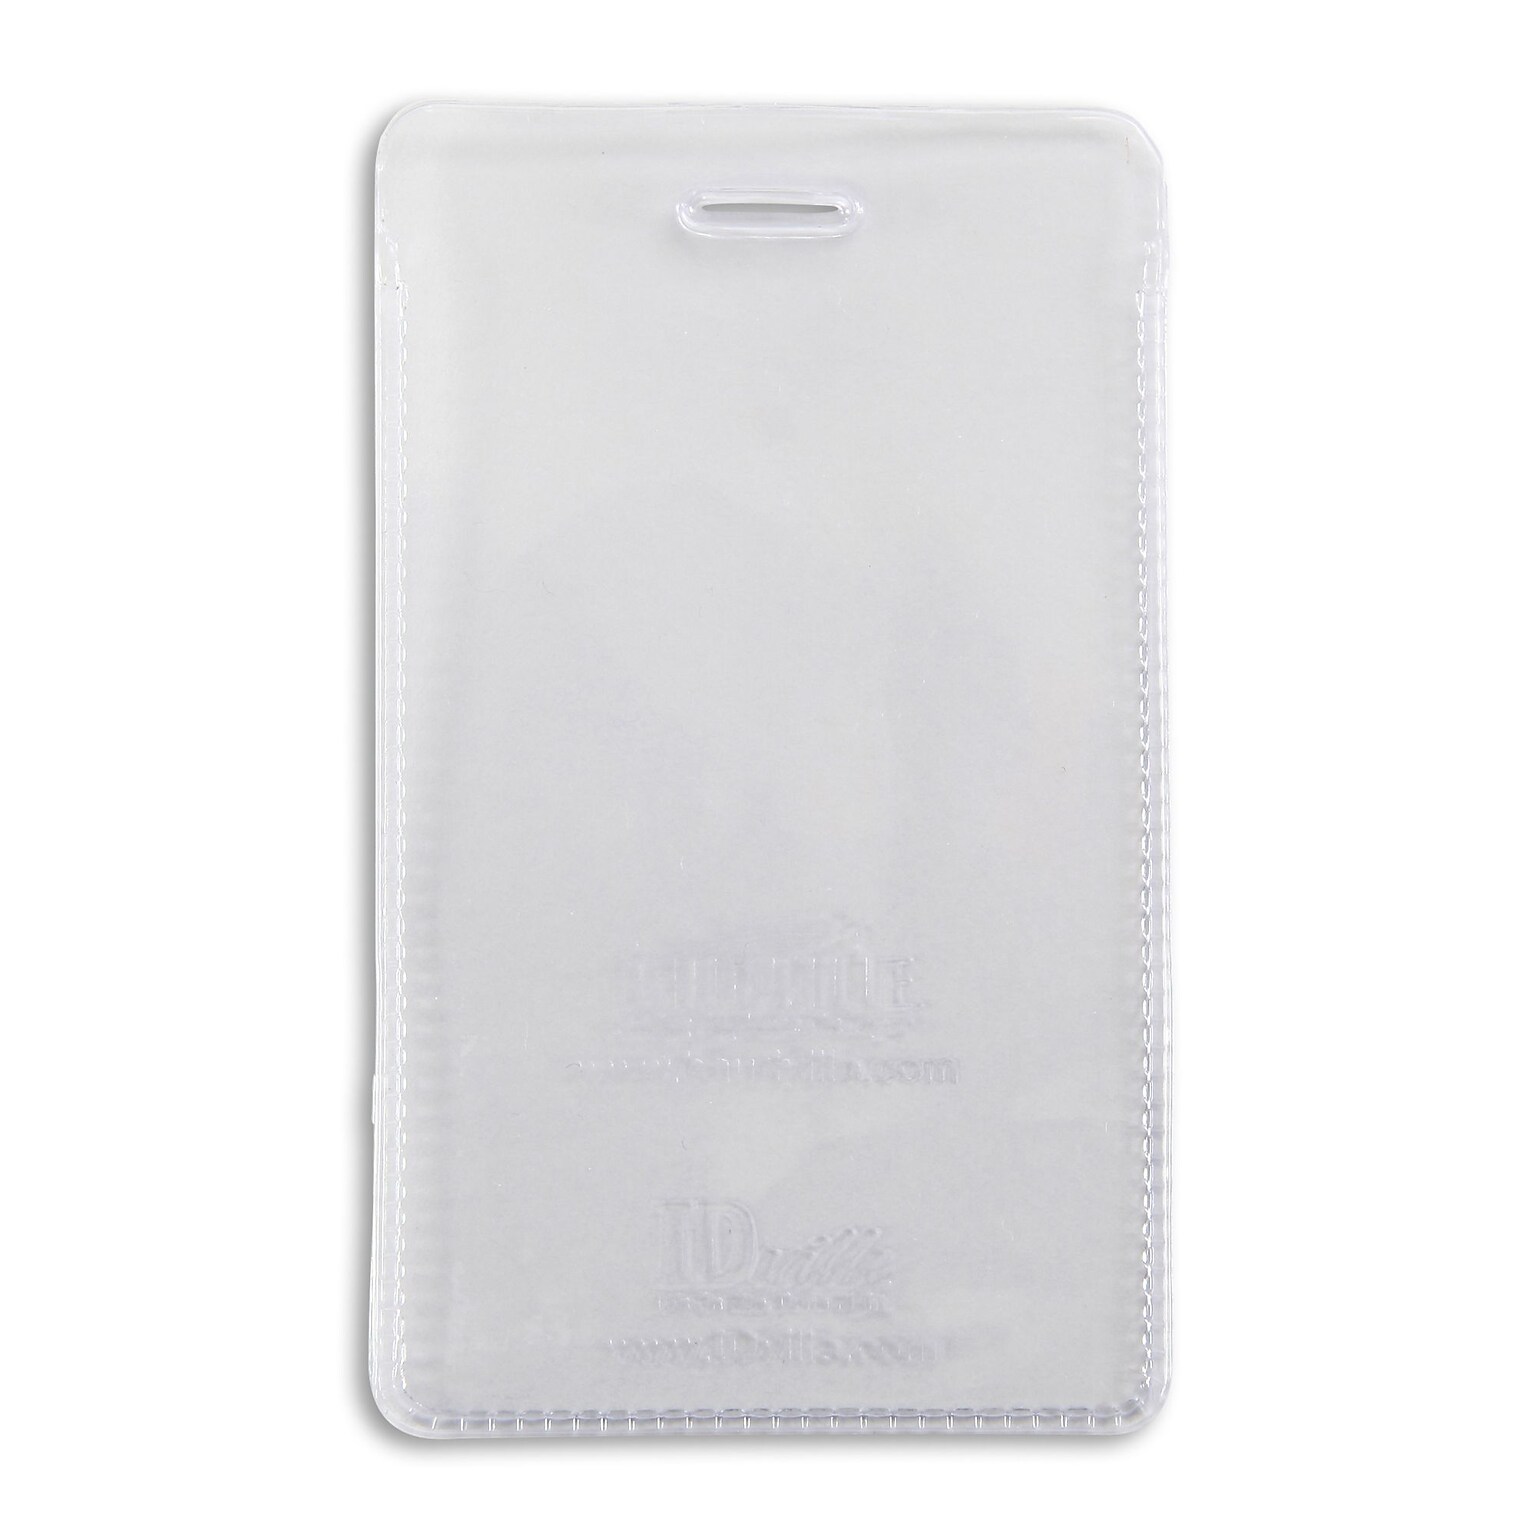 IDville Vertical Credit Card Size Badge Holders with Slot, Clear, 50/Pack (134254331)